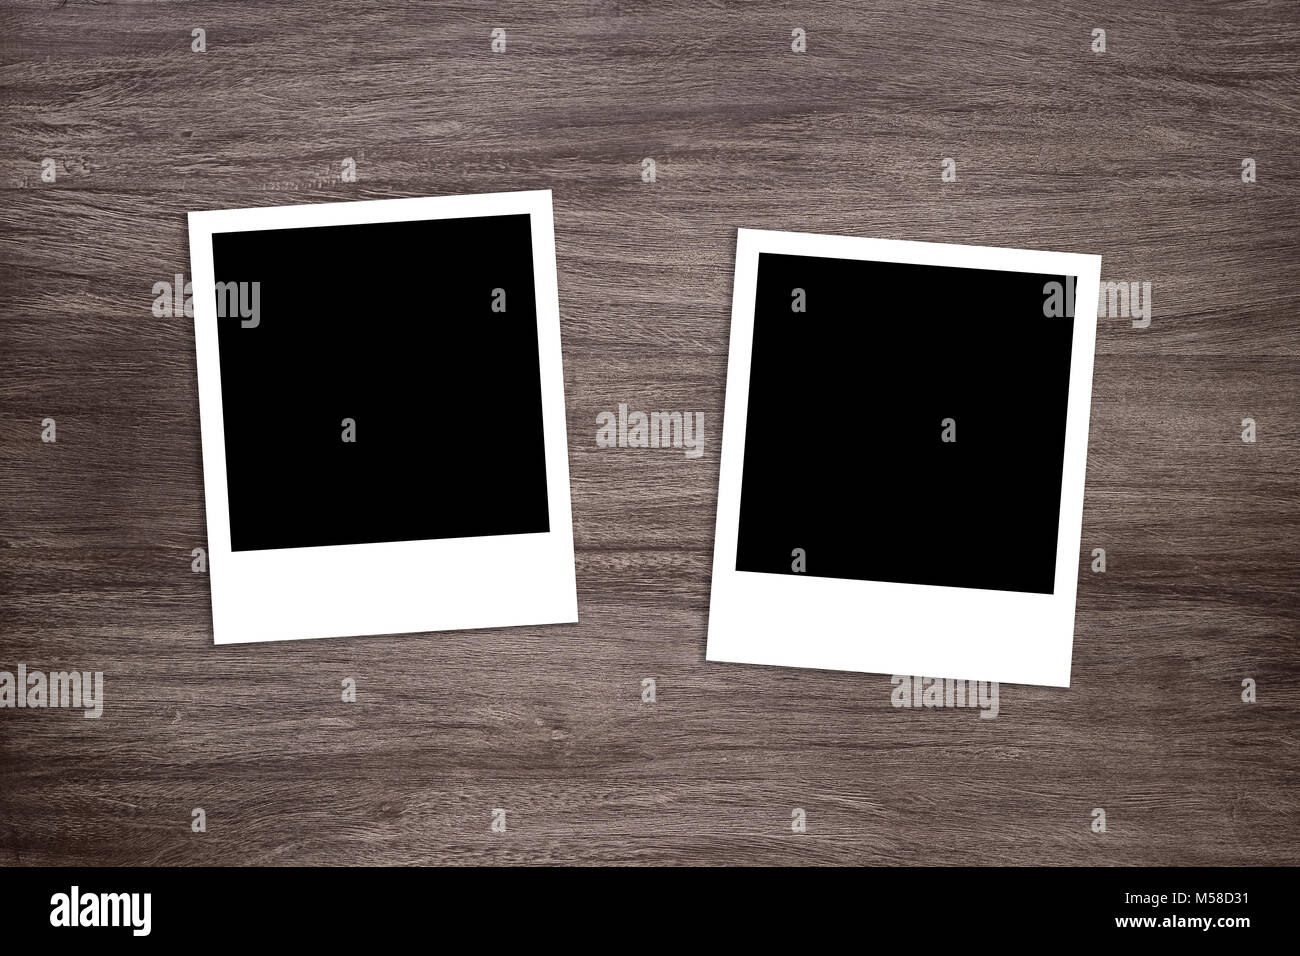 two blackened instant photo print templates on wooden background Stock Photo